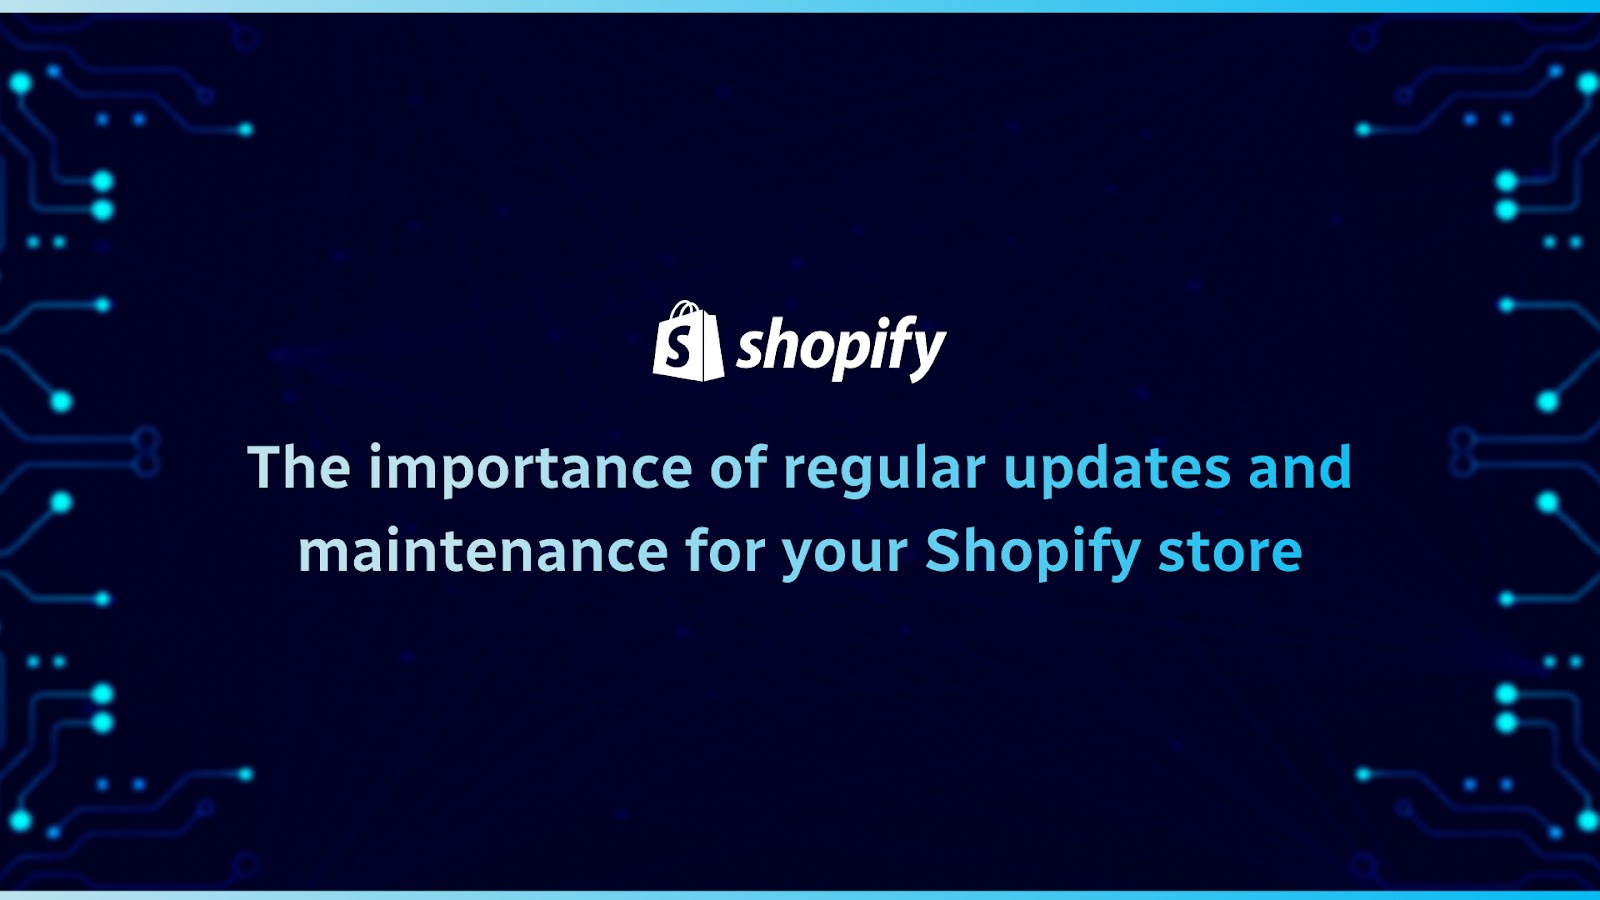 The importance of regular updates and maintenance for your Shopify store